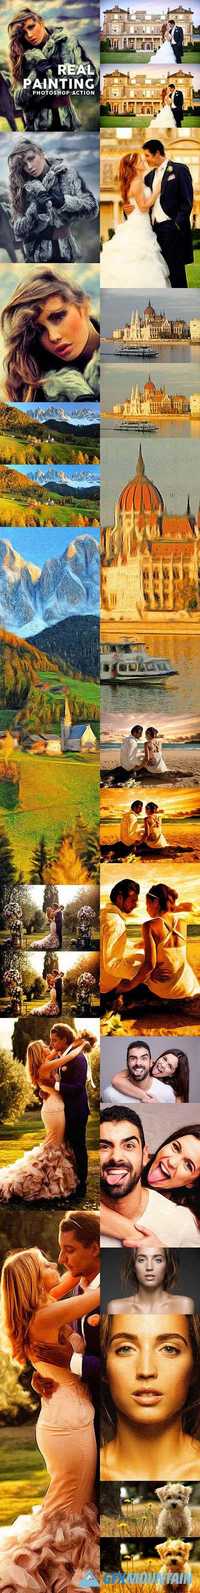 GraphicRiver - Real Painting Photoshop Action 16132938